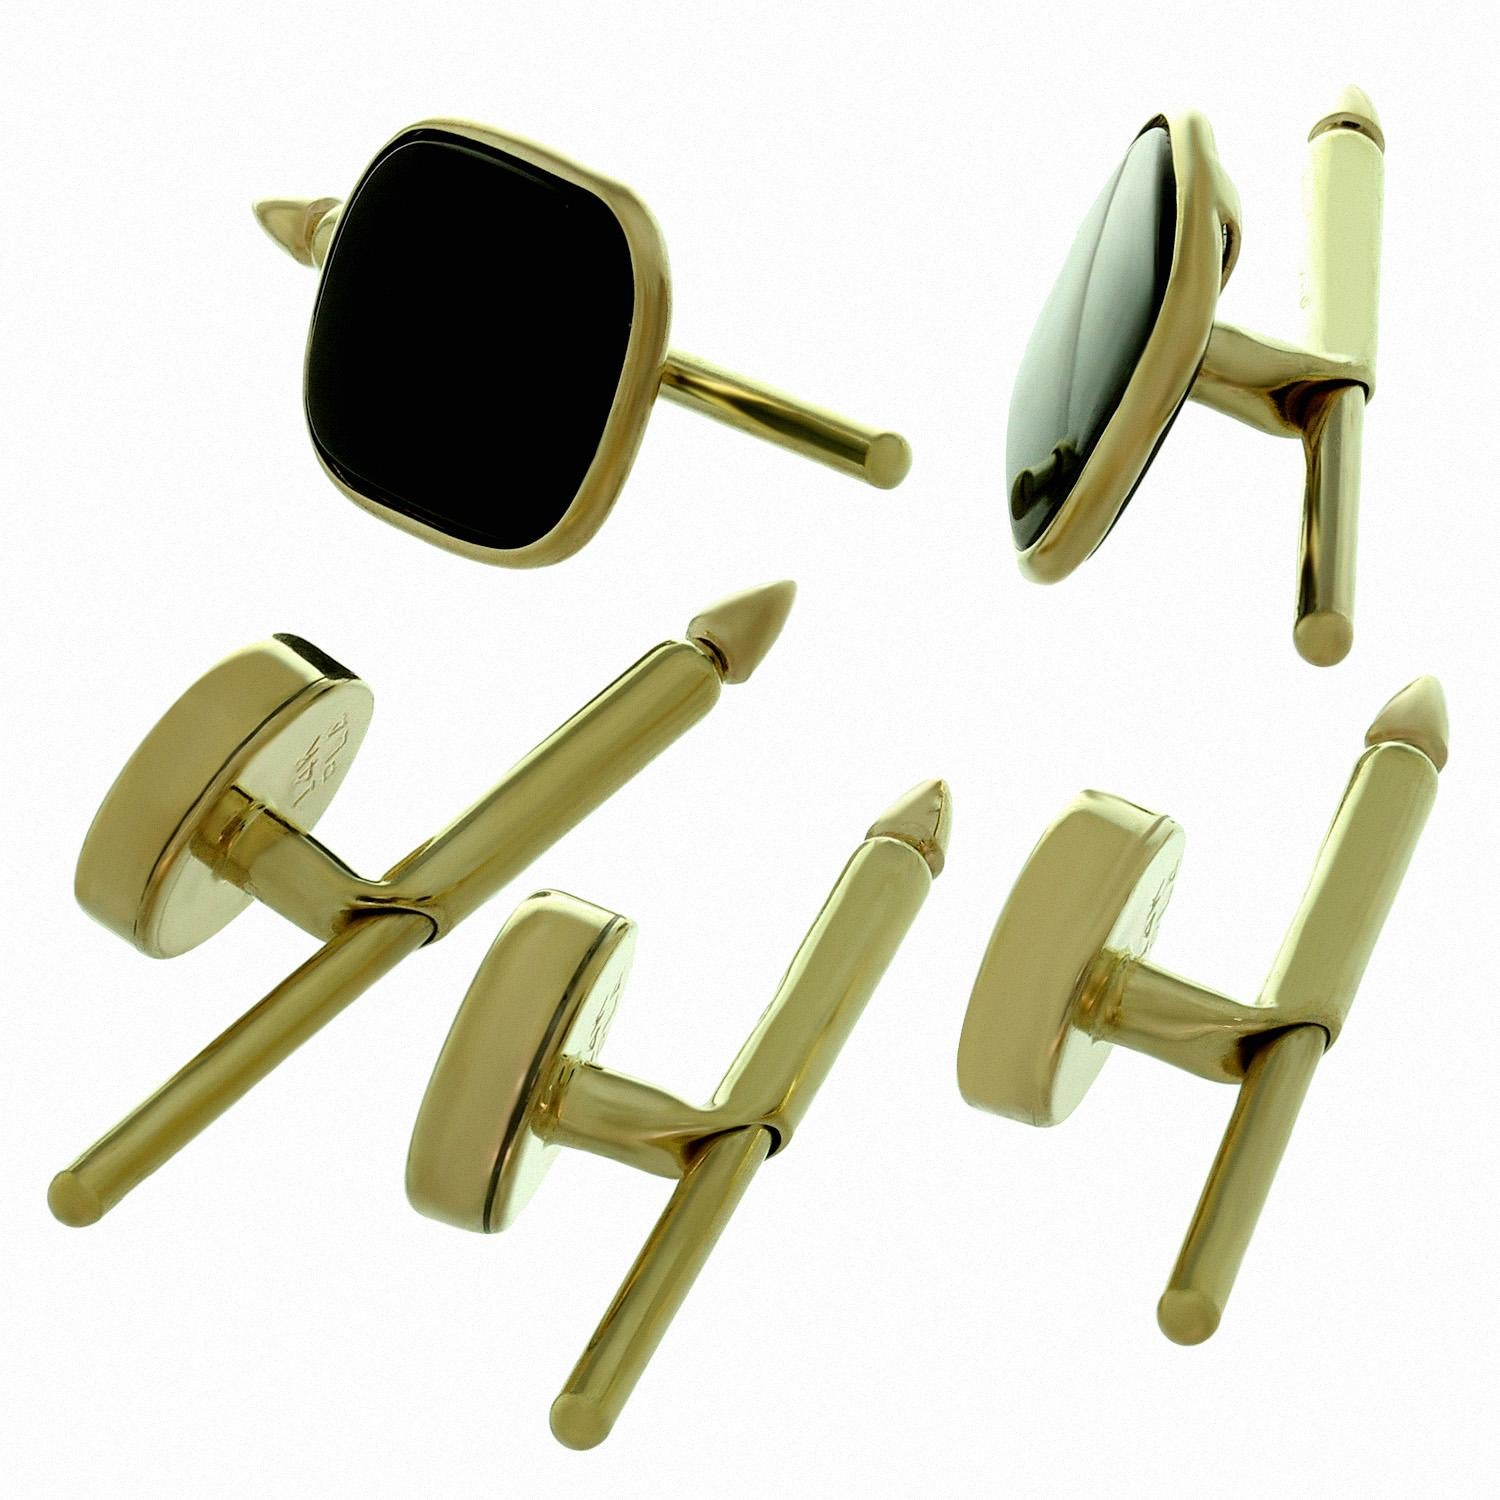 This vintage 1970s set of 5 button studs for men feature classic rectangular and oval shapes crafted in 14k yellow gold and set with black onyx. Measurements: 0.43